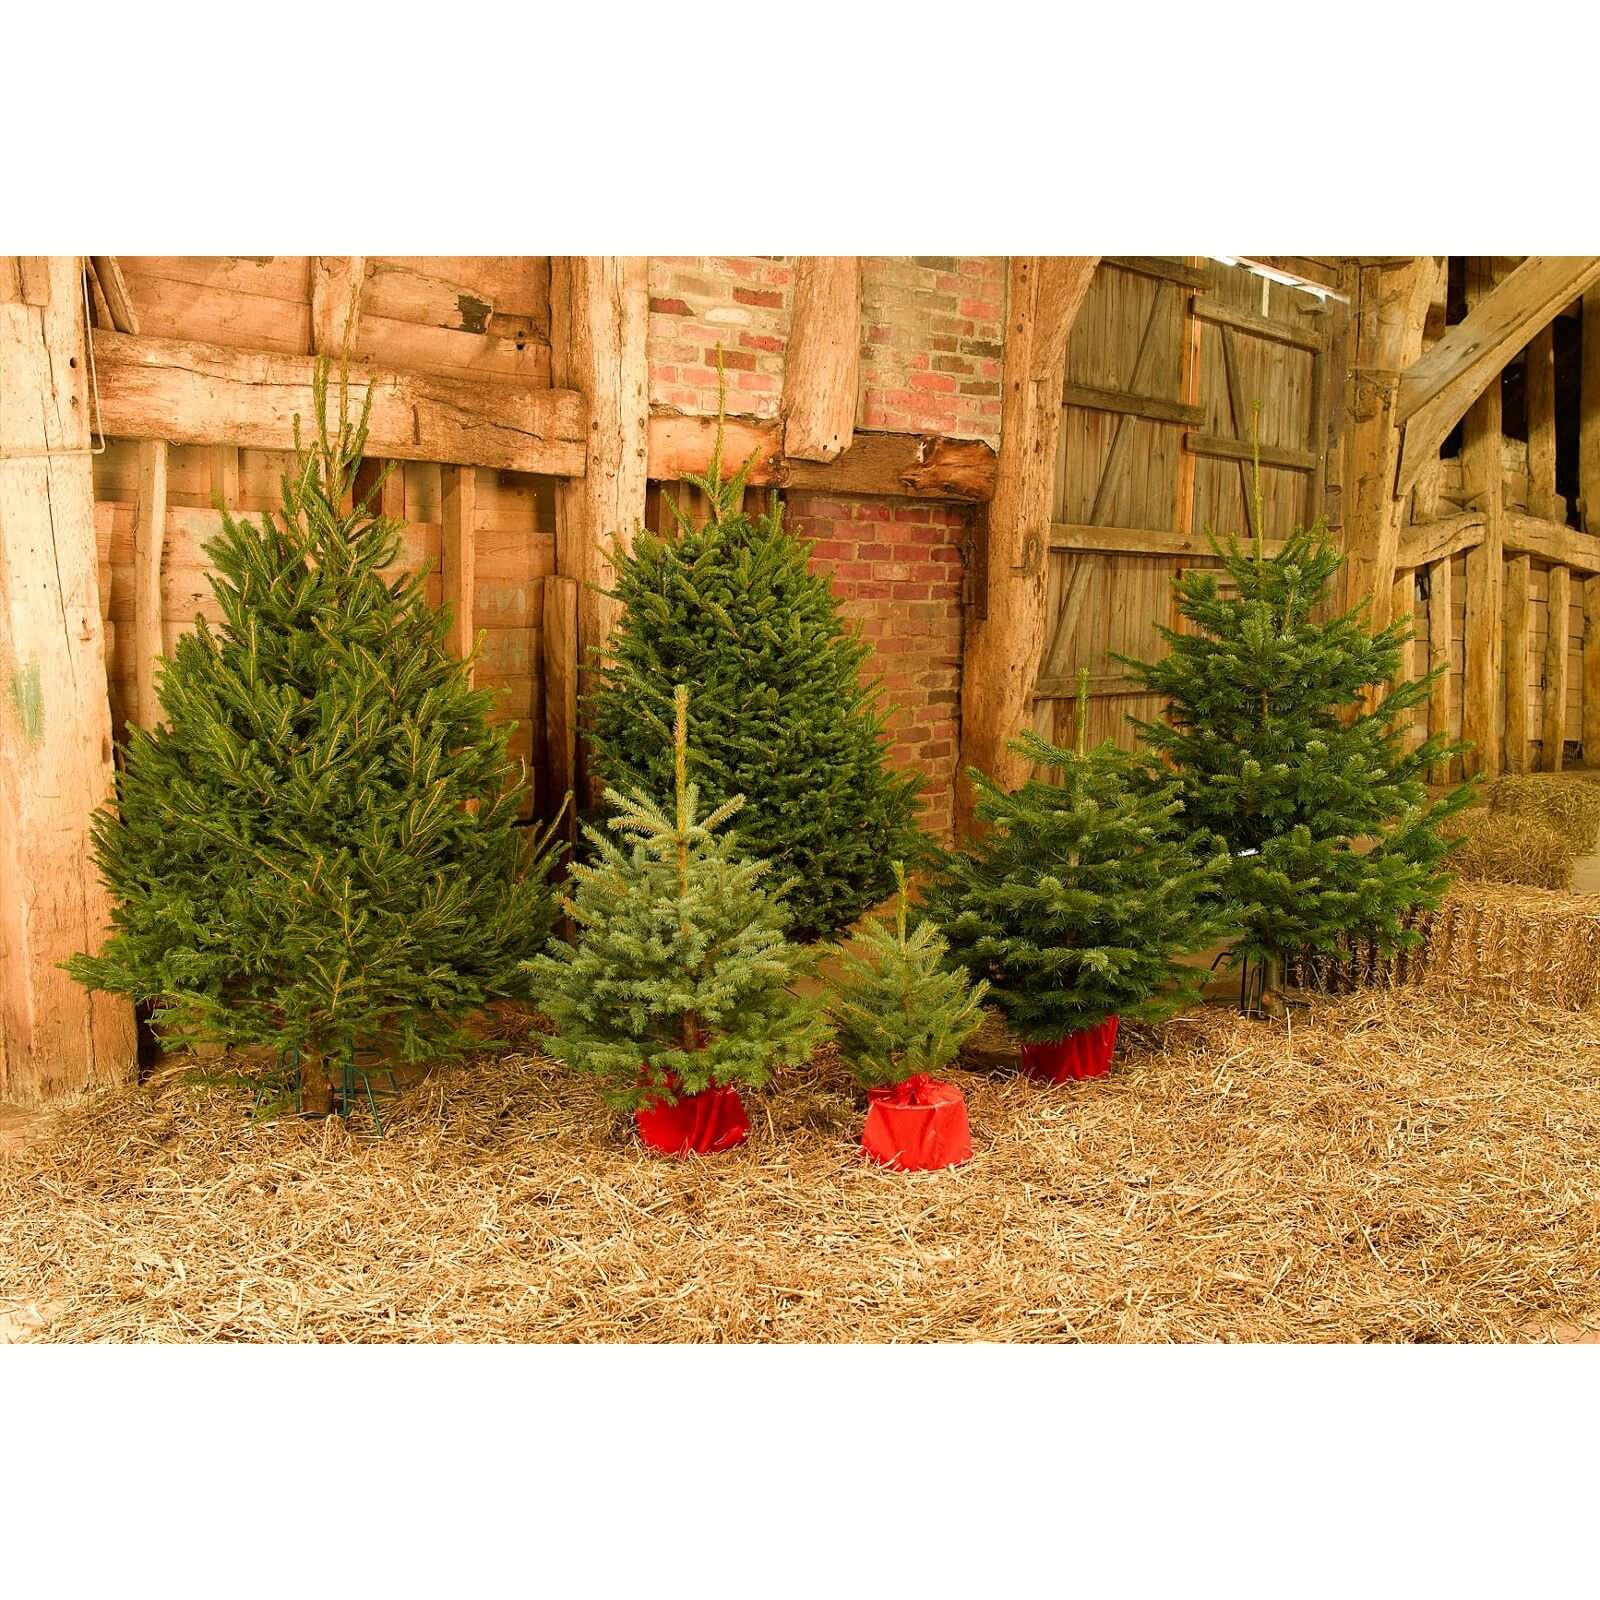 40-60cm (1.5-2ft) Living Pot Grown Blue Spruce Real Christmas Tree